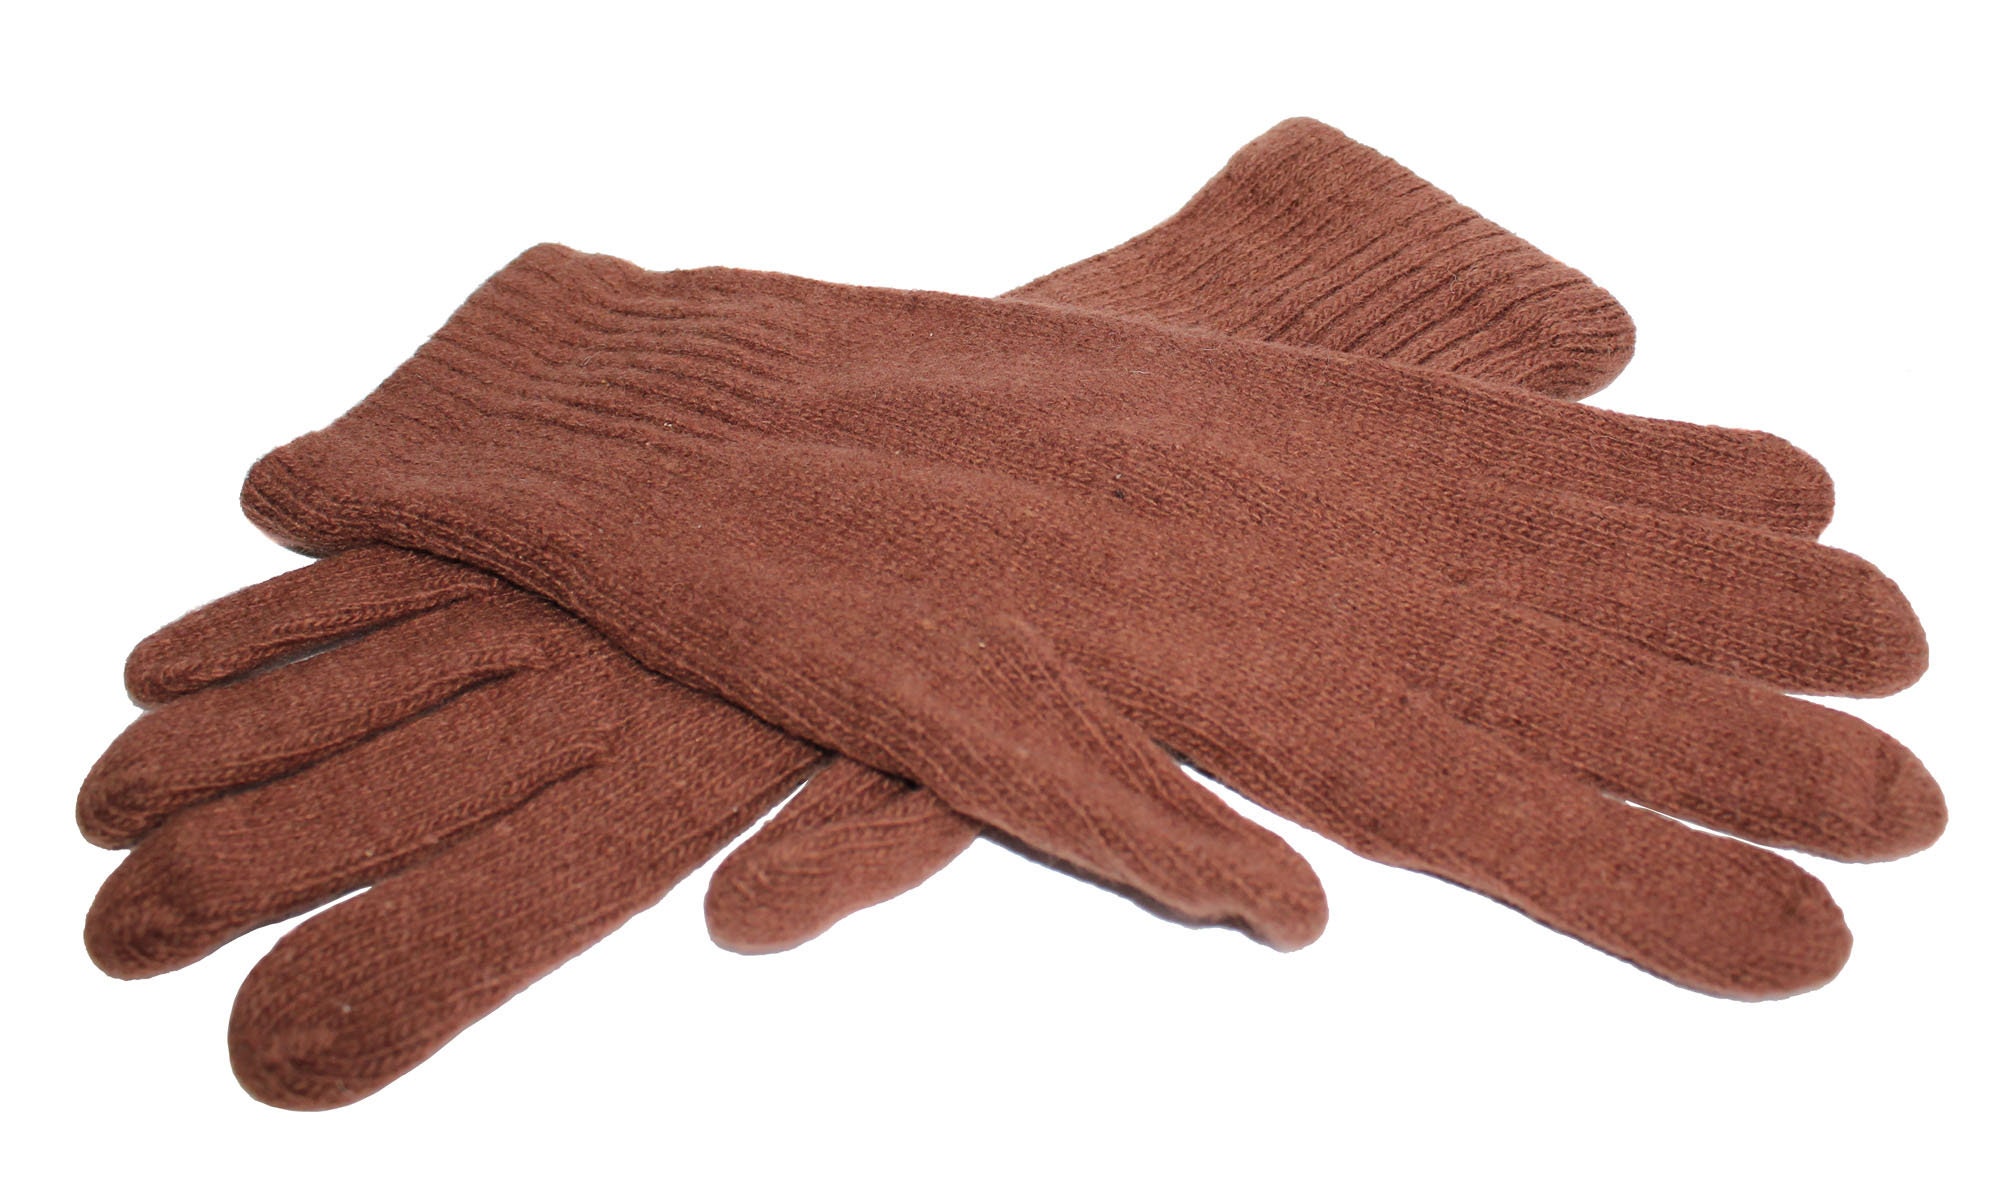 Soviet Combined Arms Officer/'s brown Warm Winter gloves cotton gloves with fur Russian military gloves USSR Army Men/'s work gloves Soldiers Heavy duty gloves